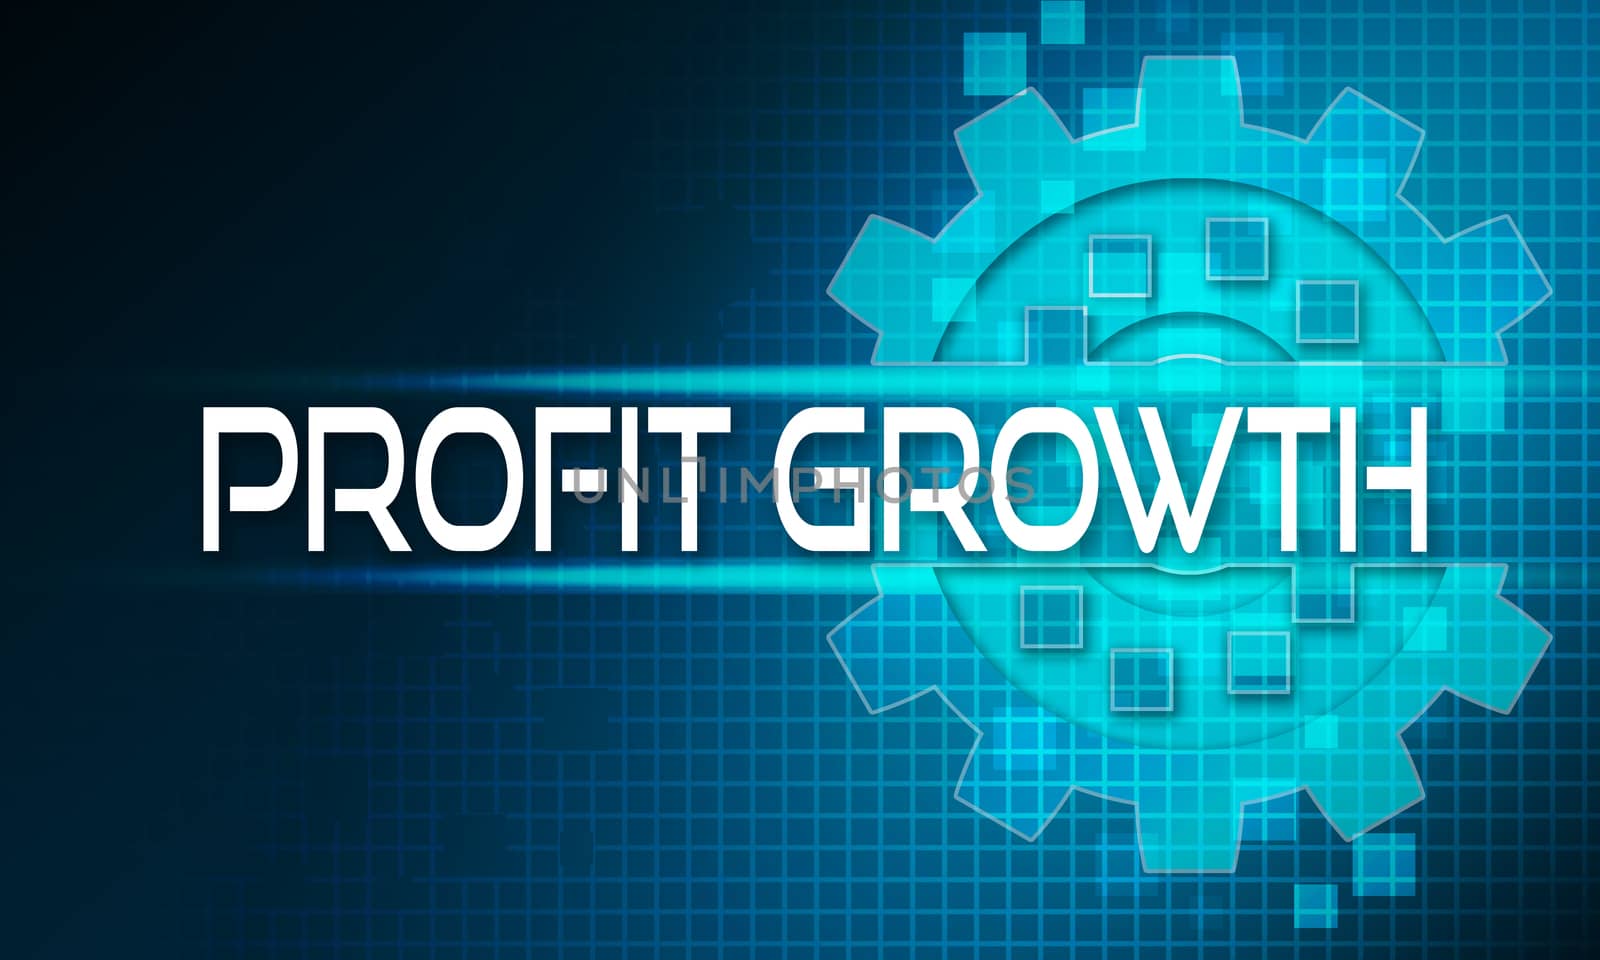 Profit growth concept text on the mechanism of gears. Technology background, 3d rendering.